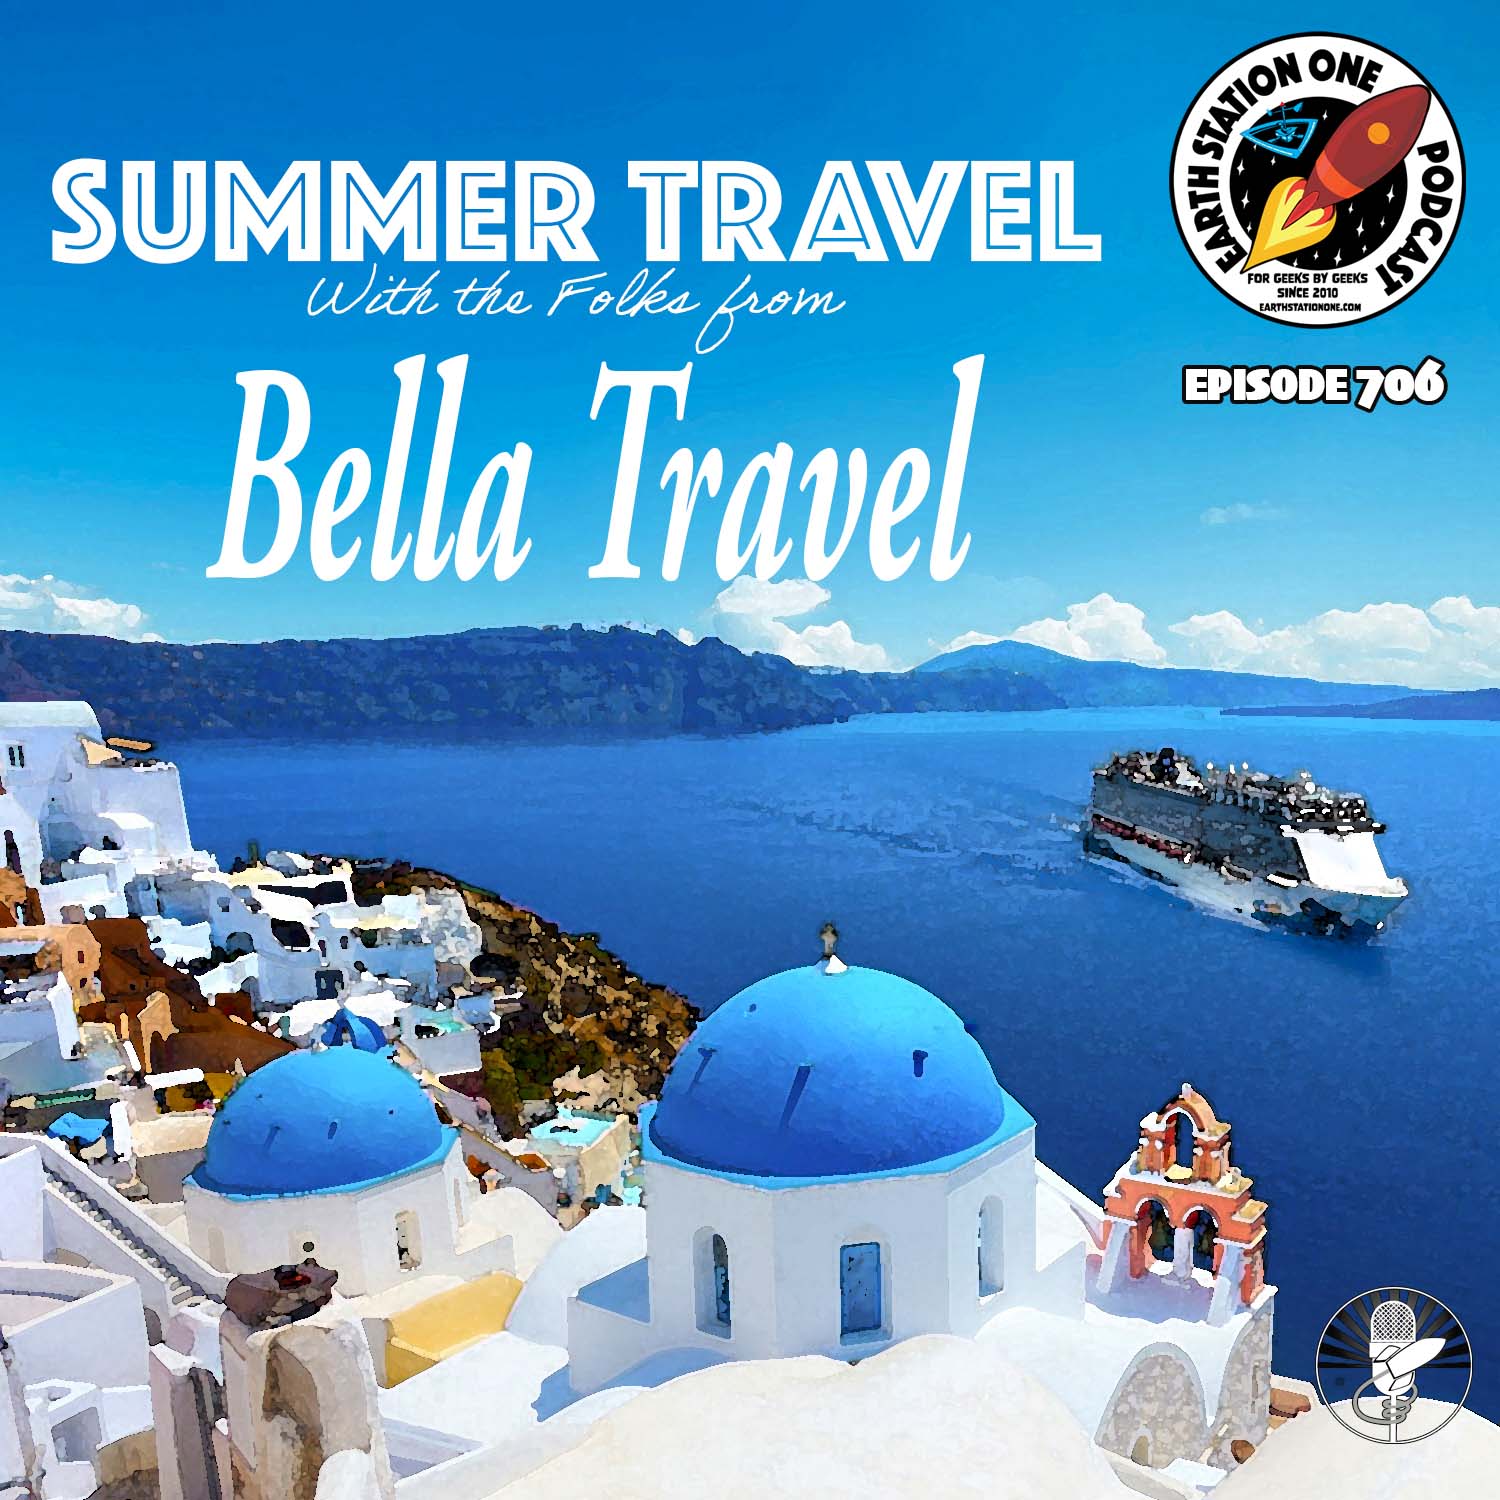 Earth Station One Ep 706 - Summer Travel with the folks from Bella Travel